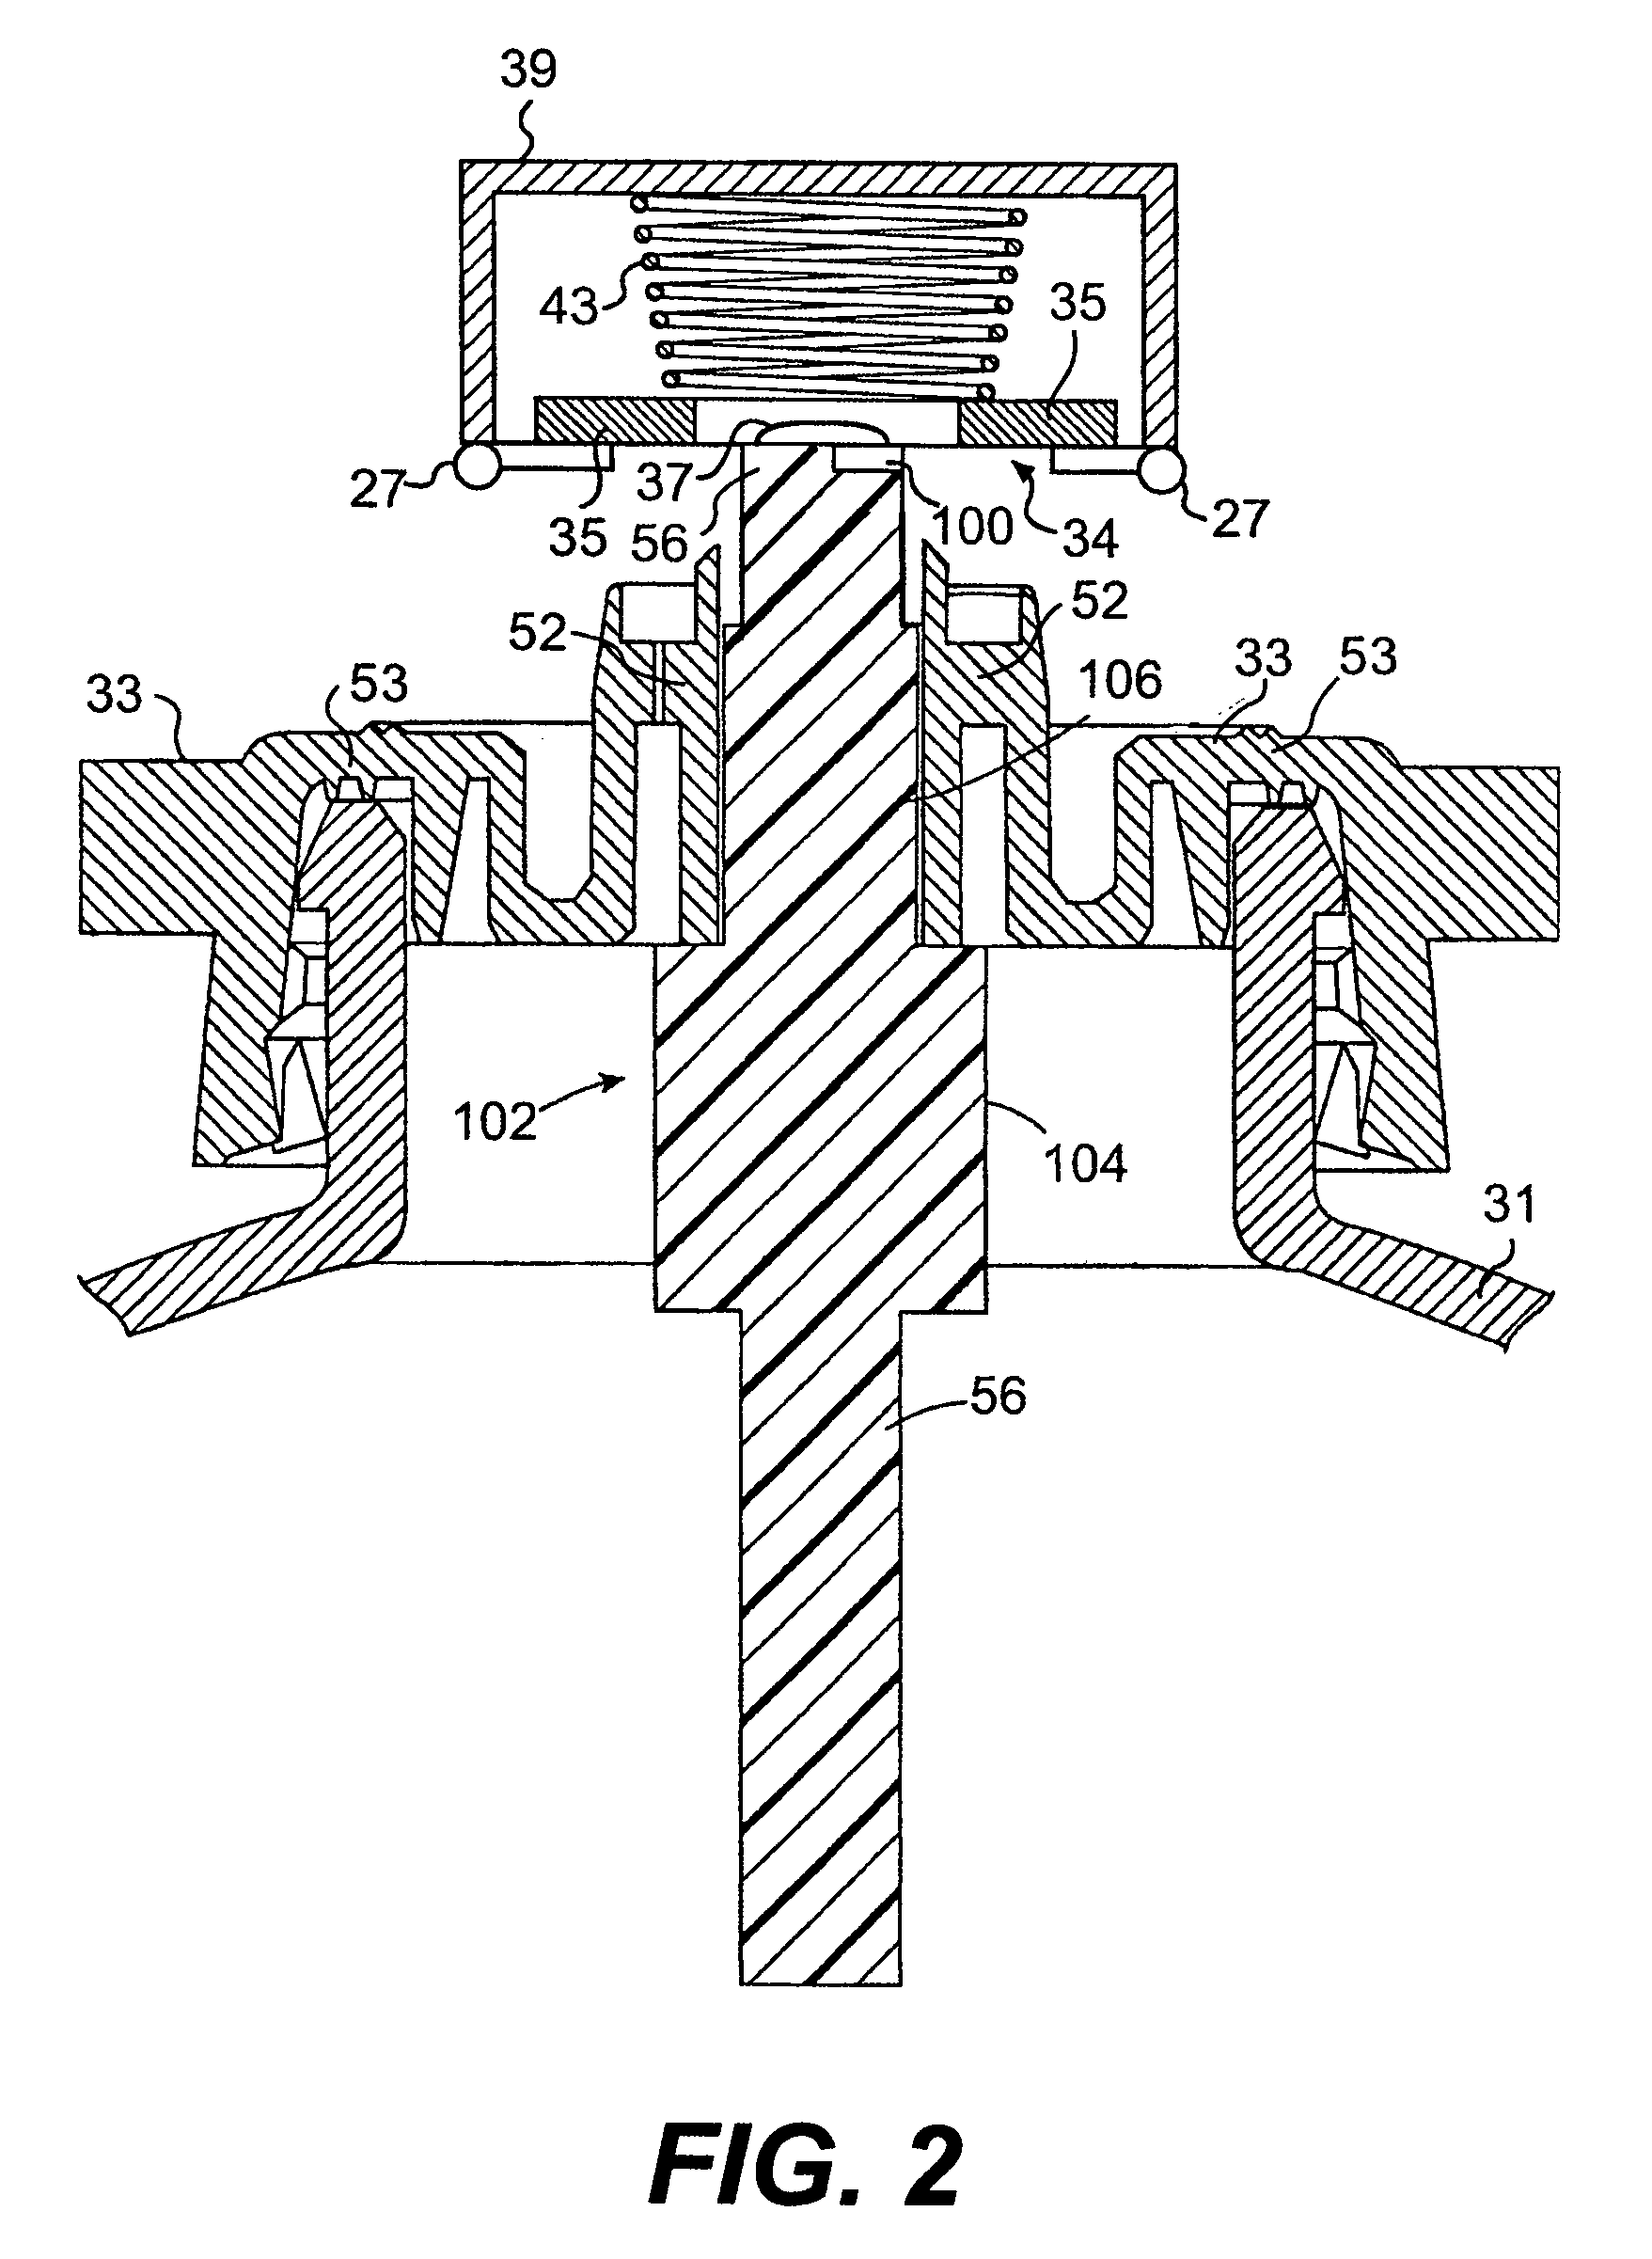 Electromechanical apparatus for dispensing volatile substances with single dispensing mechanism and cartridge for holding multiple receptacles